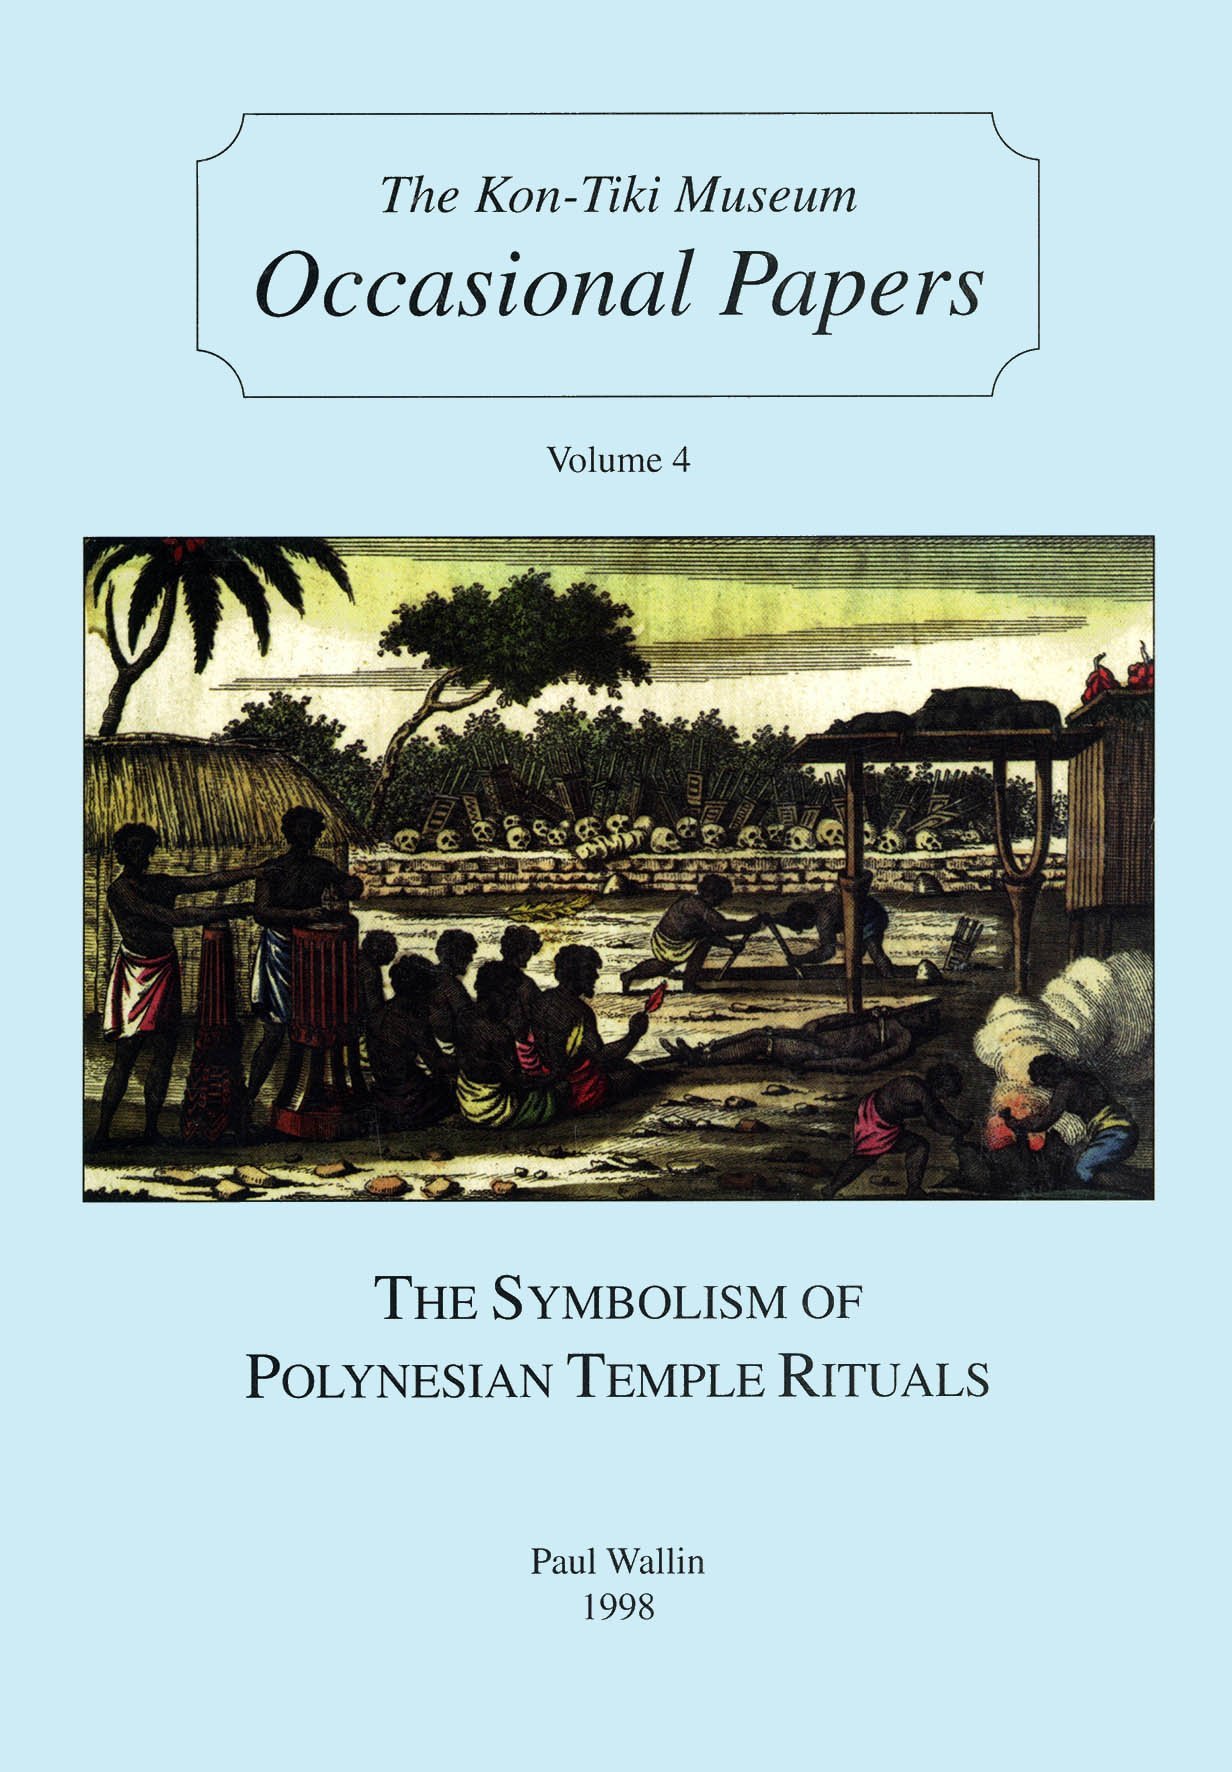 The Symbolism of Polynesian Temple Rituals